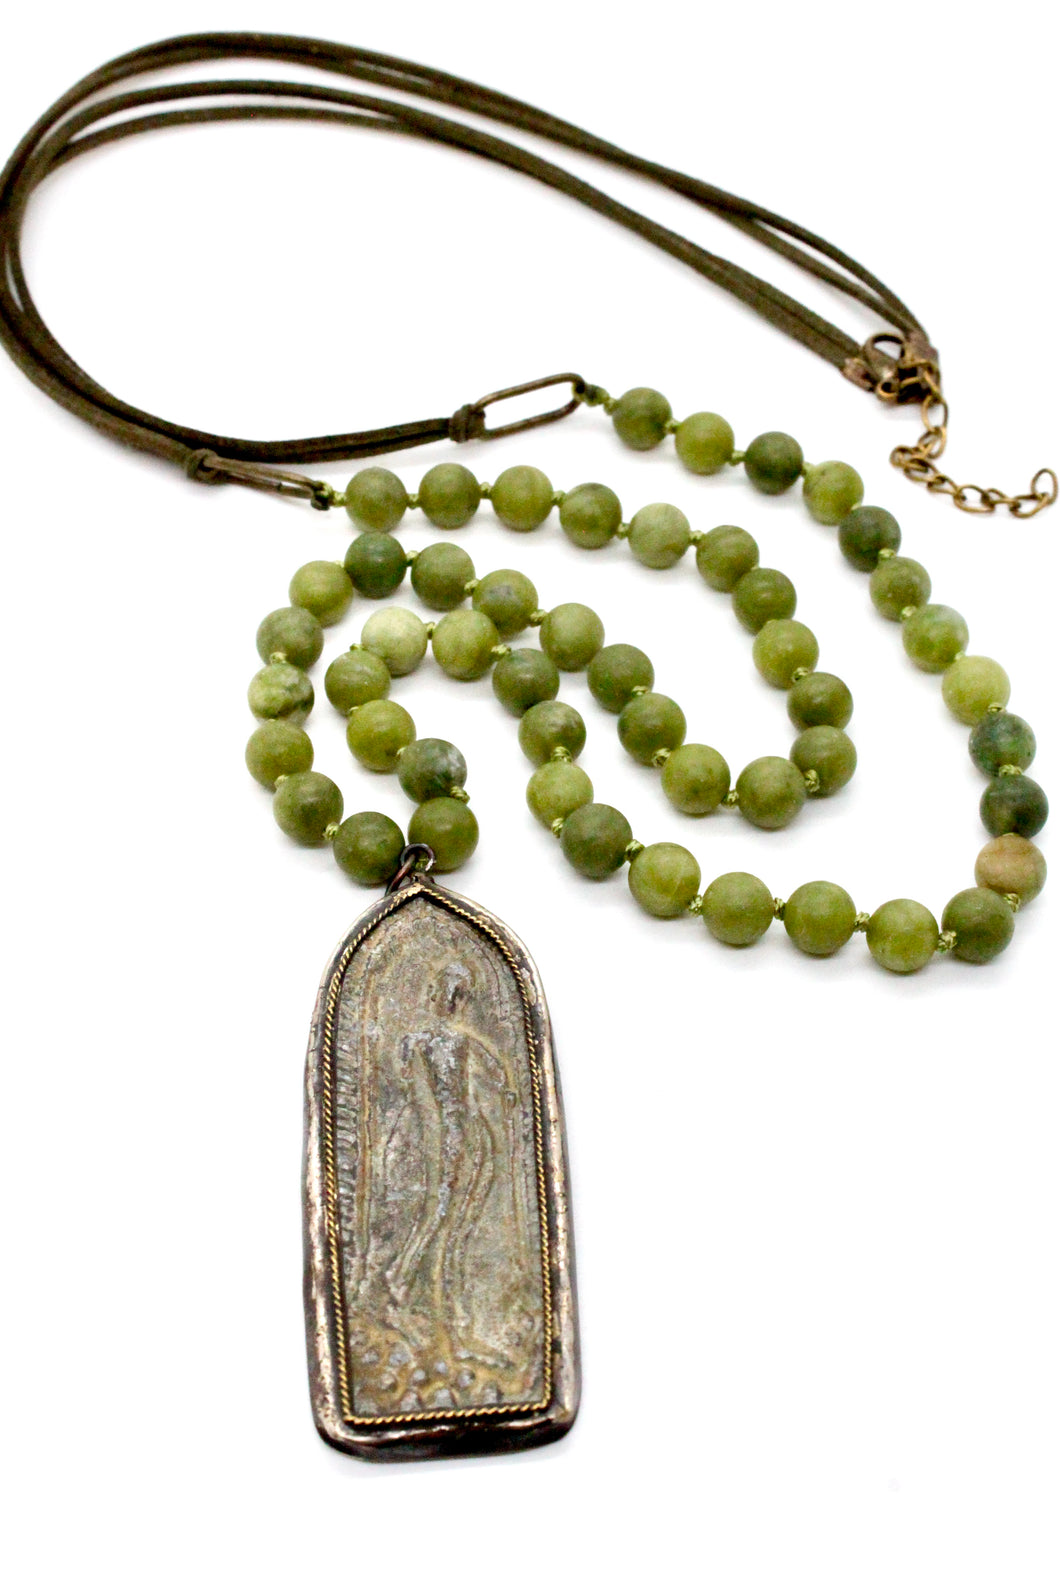 Buddha Necklace 122 One of a Kind -The Buddha Collection-